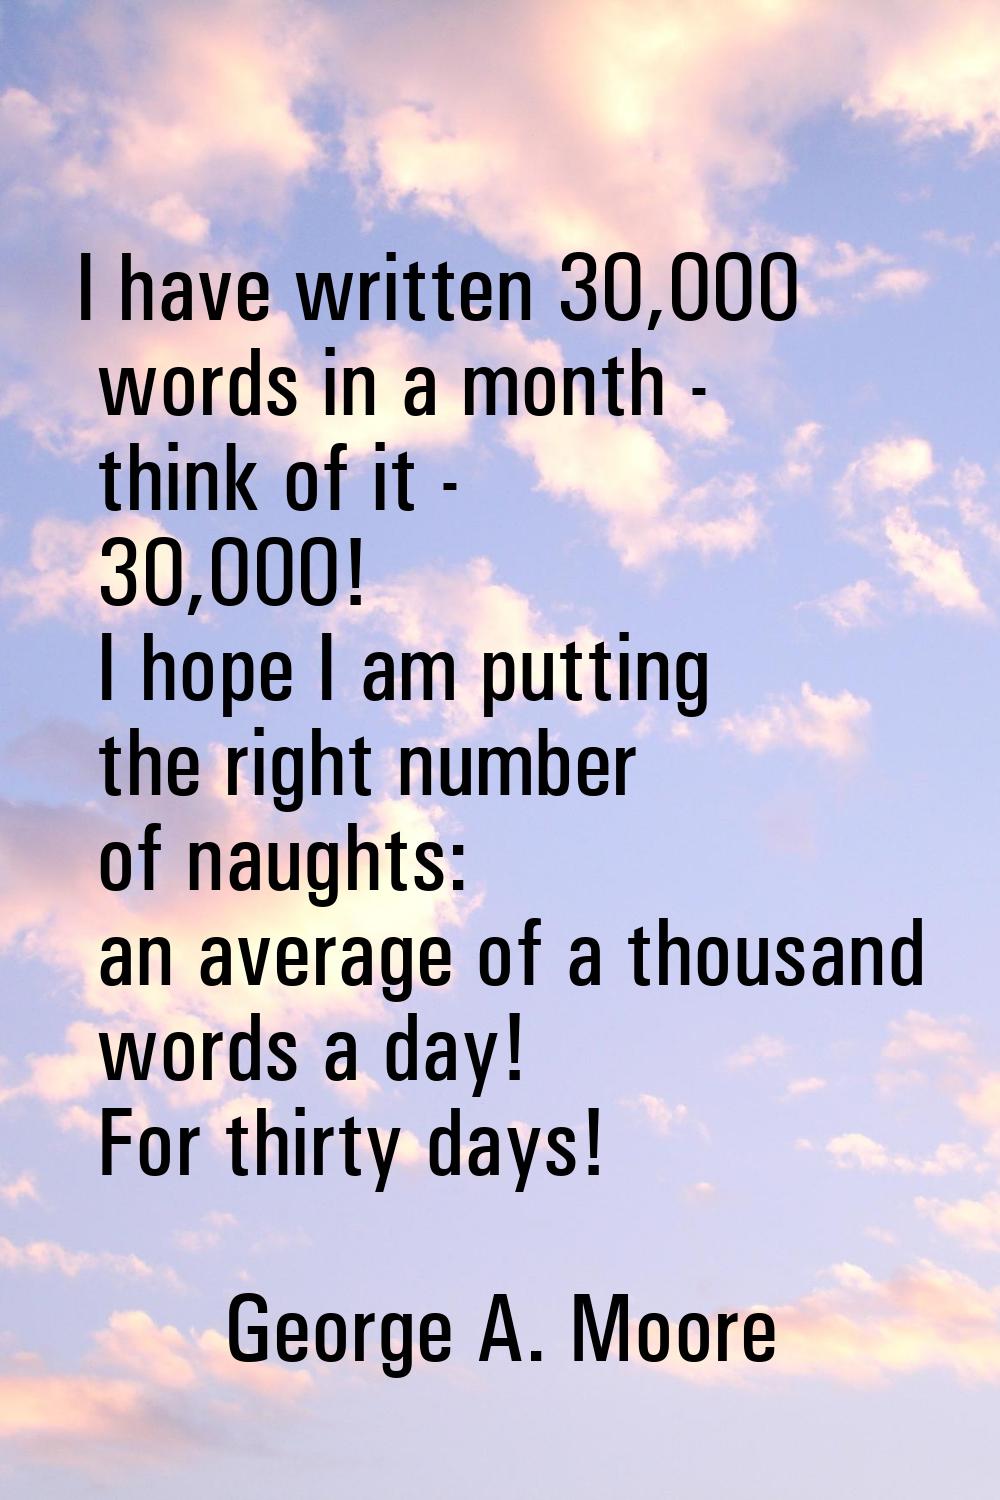 I have written 30,000 words in a month - think of it - 30,000! I hope I am putting the right number